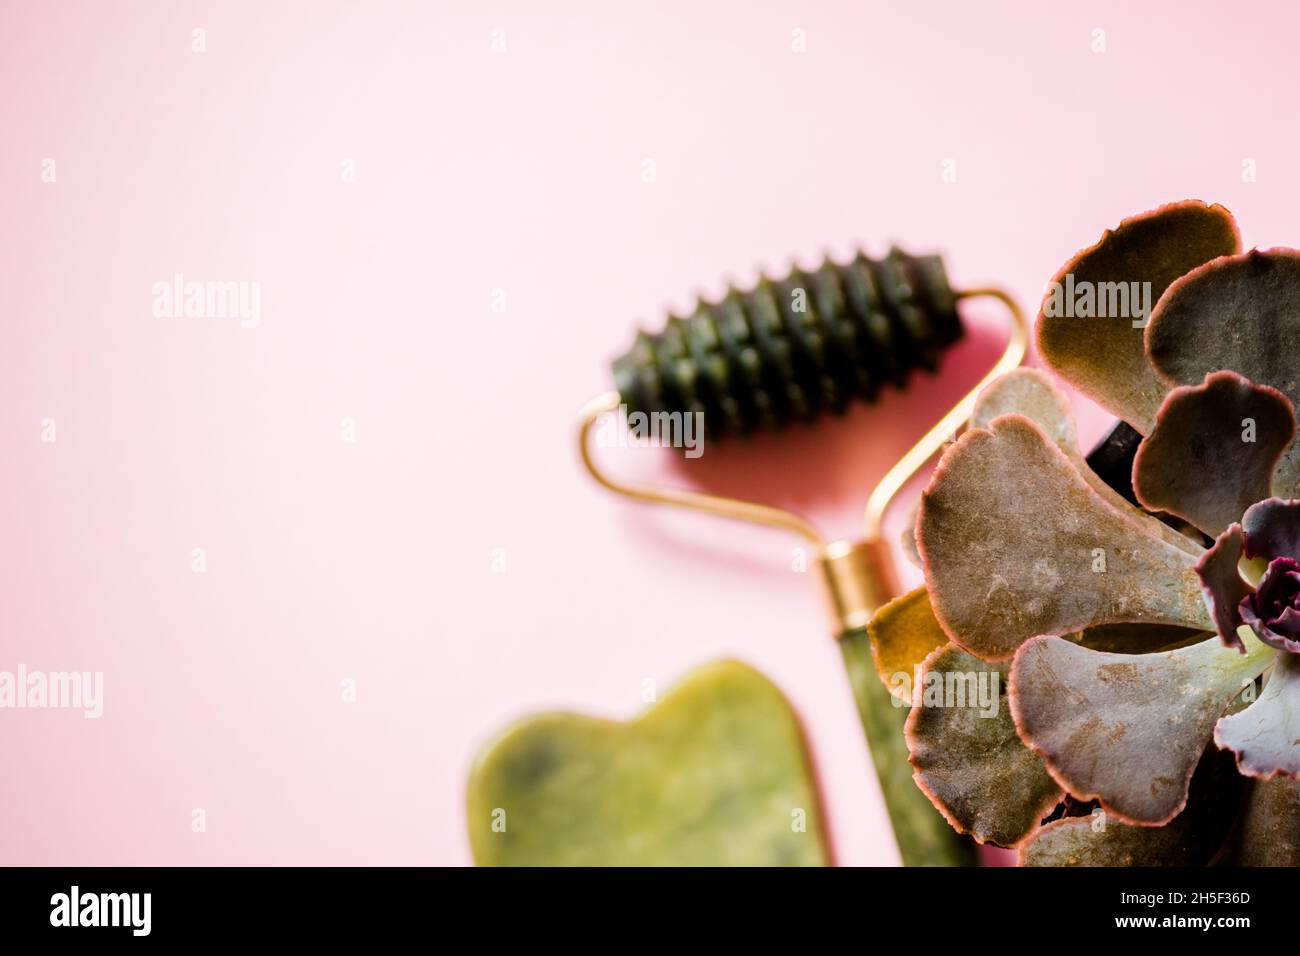 Jade roller and facial massage scrubber on a soft pink background.  Stock Photo